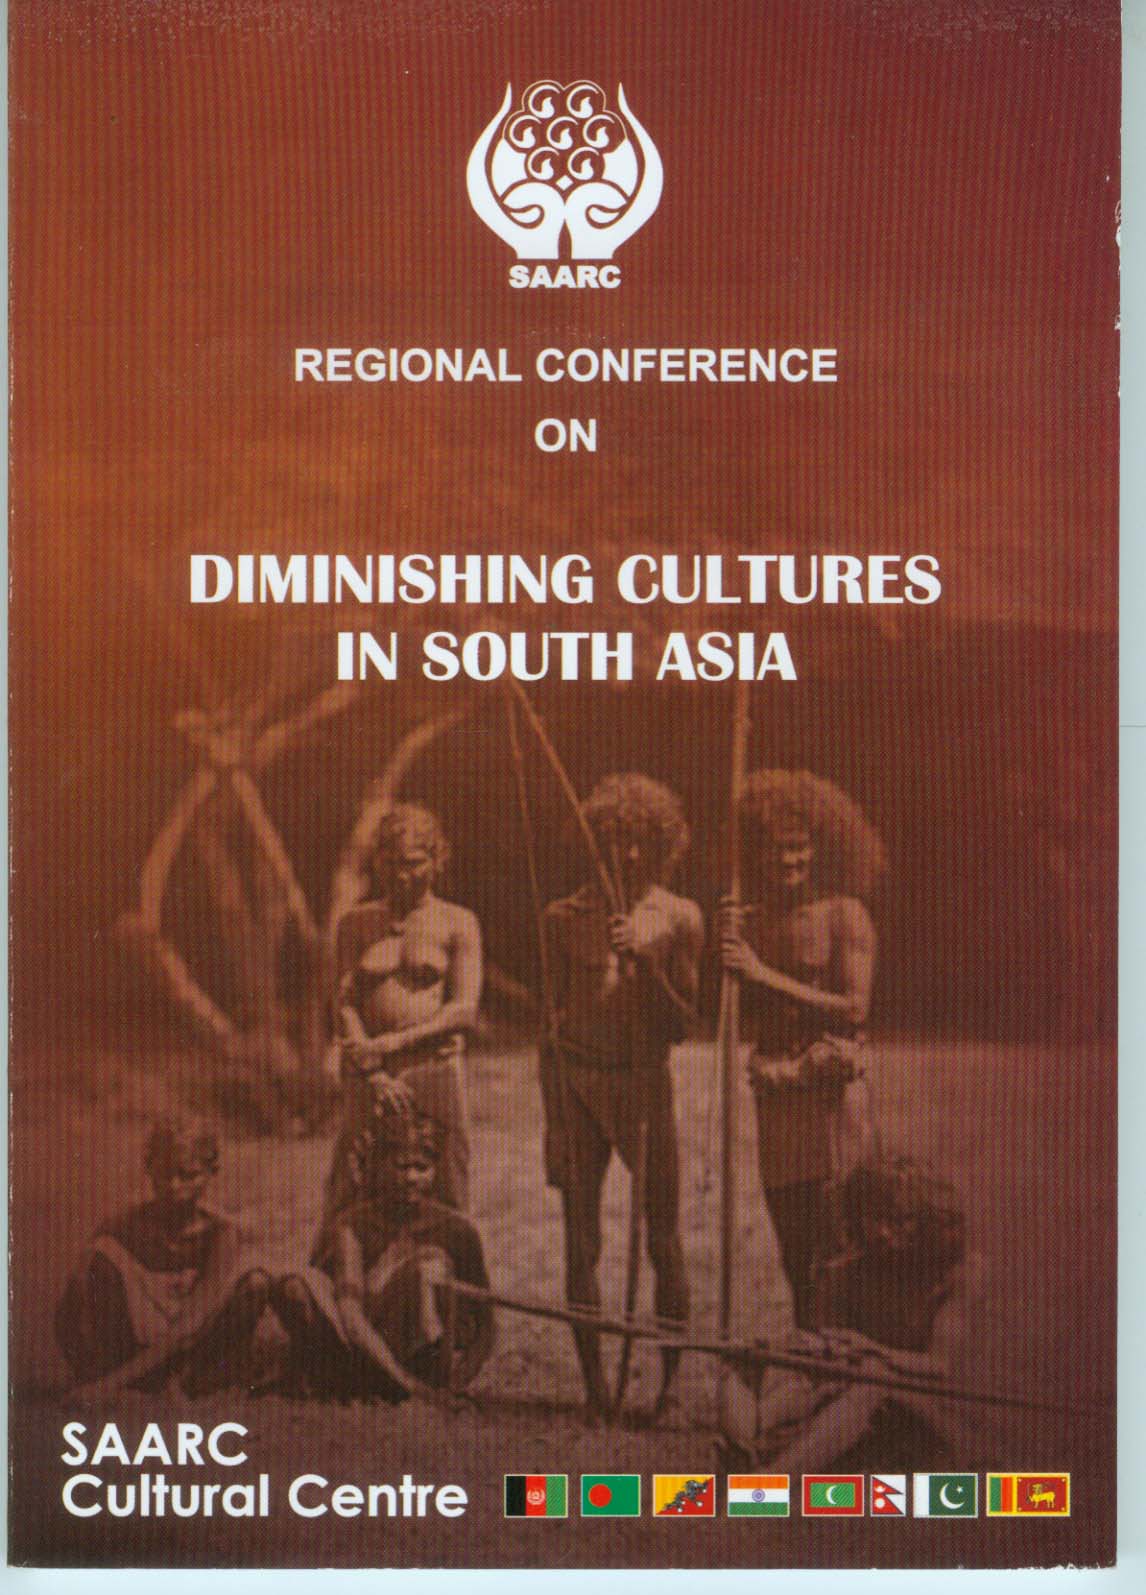 Regional Conference on Diminishing Cultures in South Asia Image